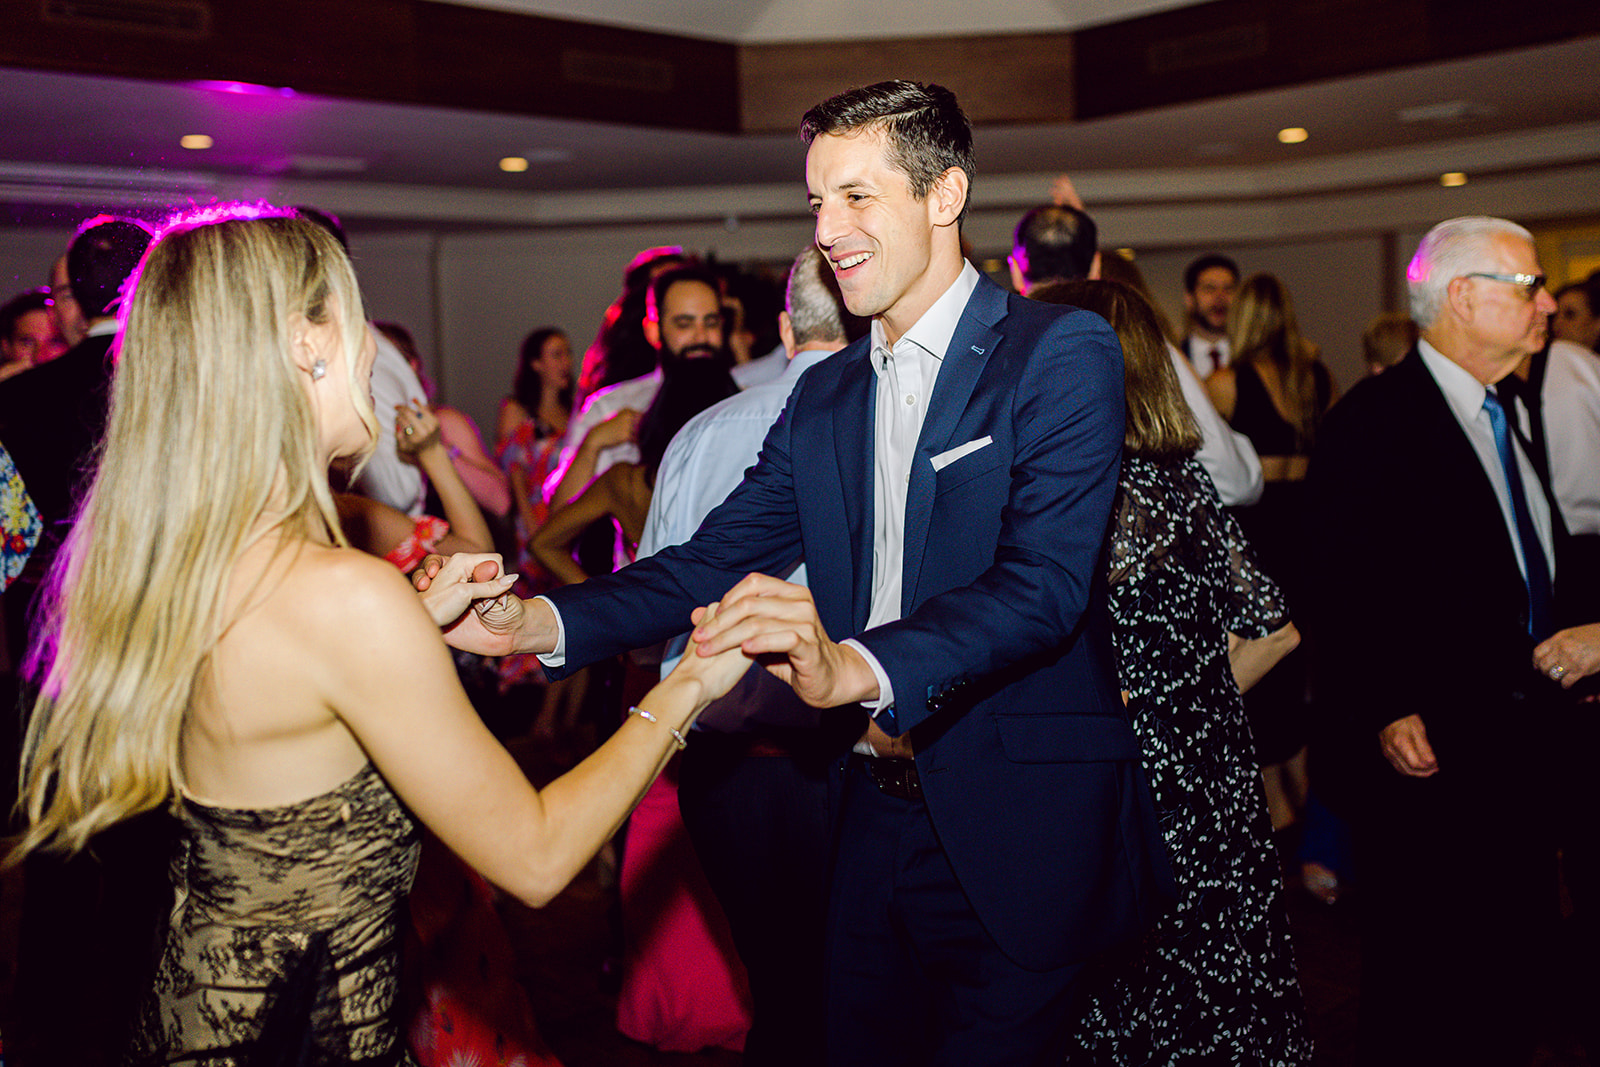 Candids of guests dancing at reception of Mayfair House Hotel & Garden, Miami on wedding day.